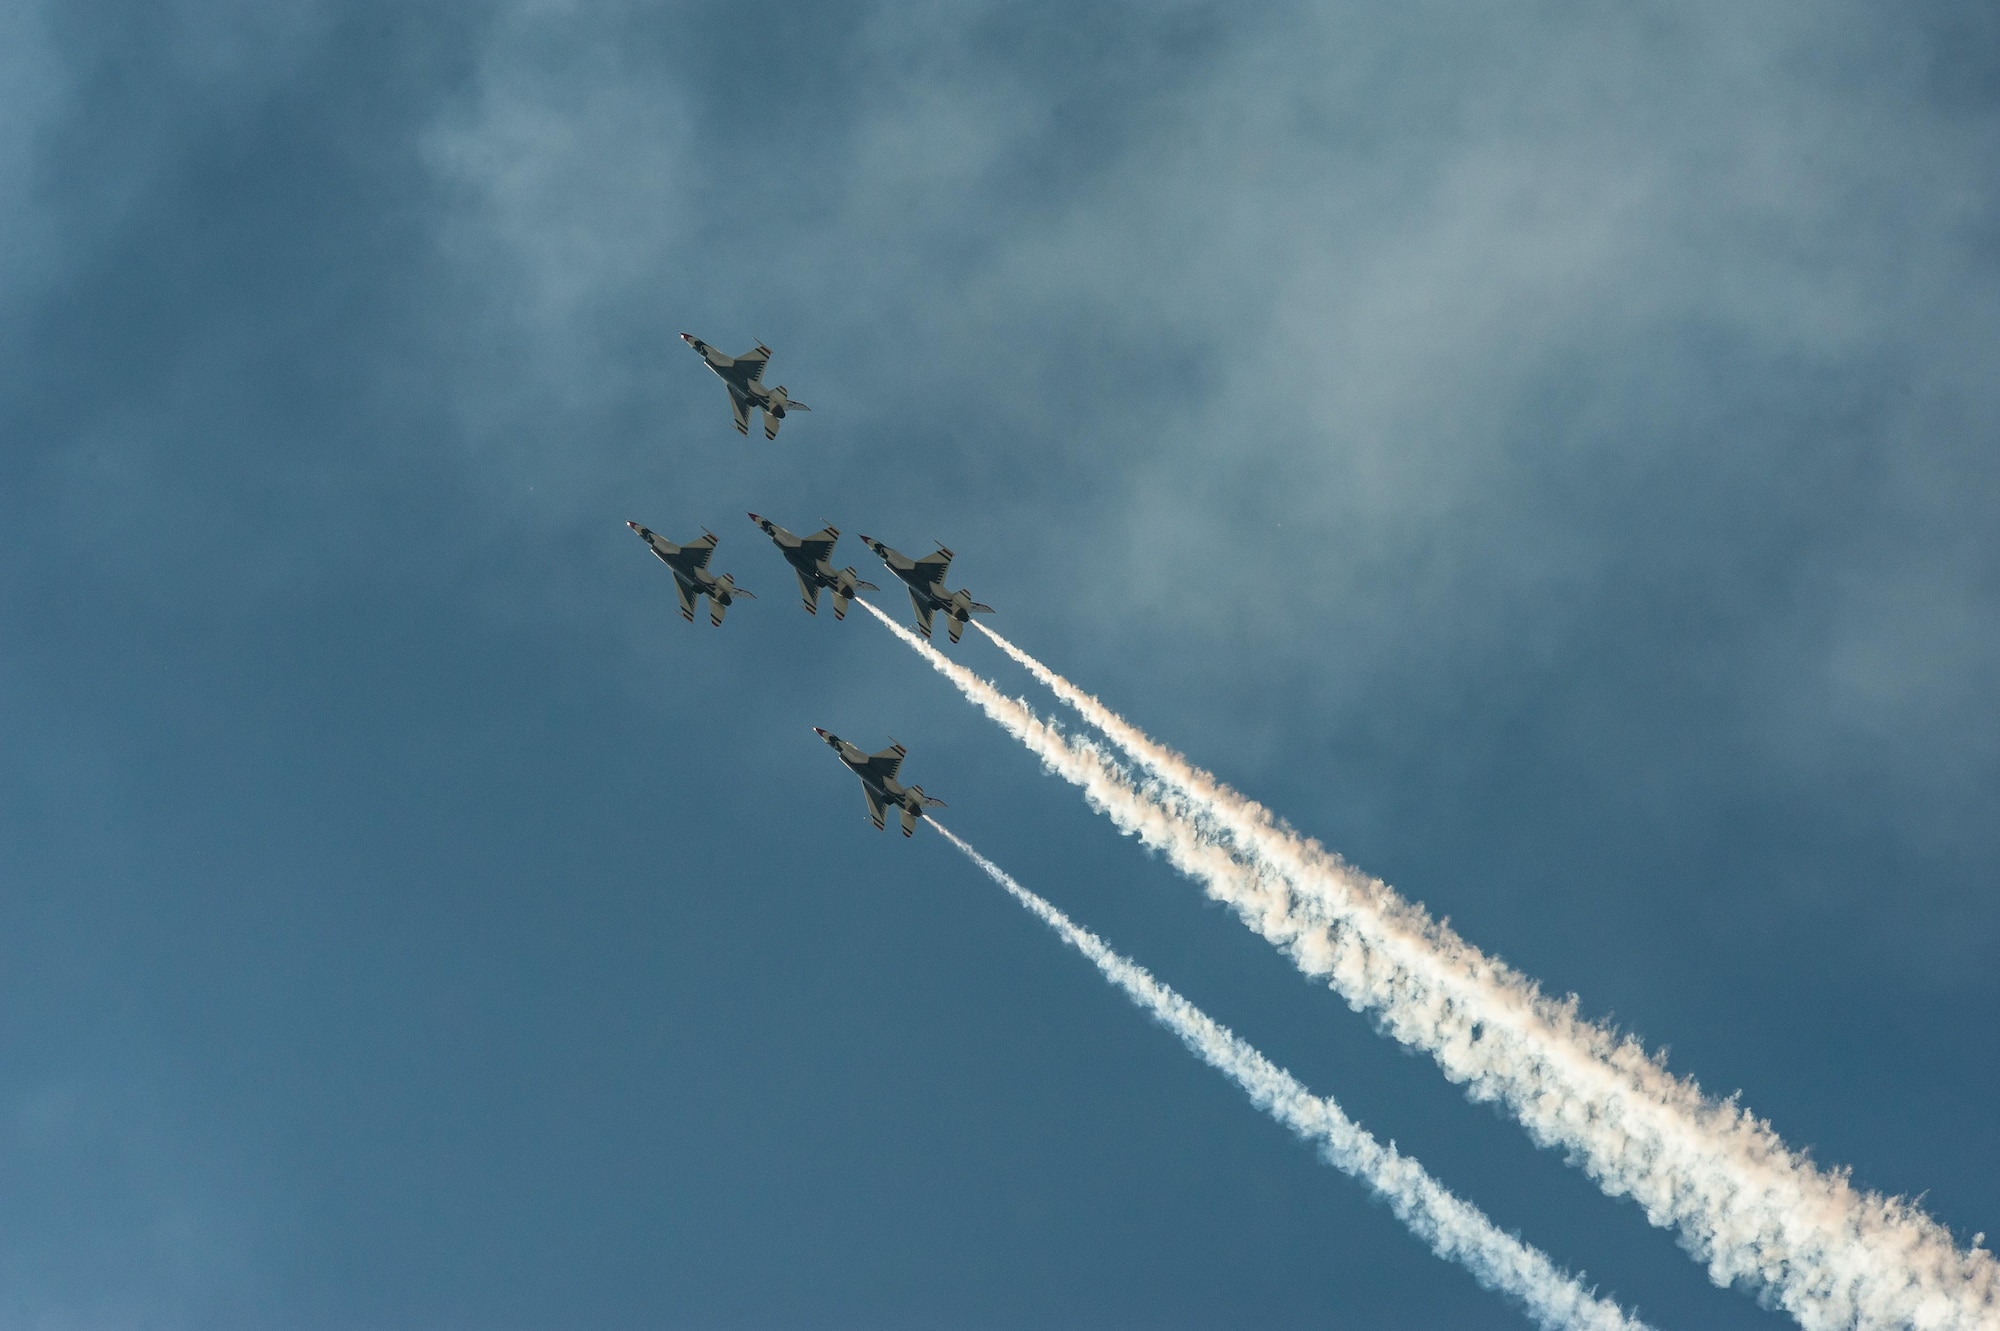 The Air Force Thunderbirds perform during the Heritage to Horizon Air Show, April 8-9, 2017, Maxwell Air Force Base, Ala. More than 135,000 visitors from the local community attend the air show.(US Air Force photo by Melanie Rodgers Cox/Released)